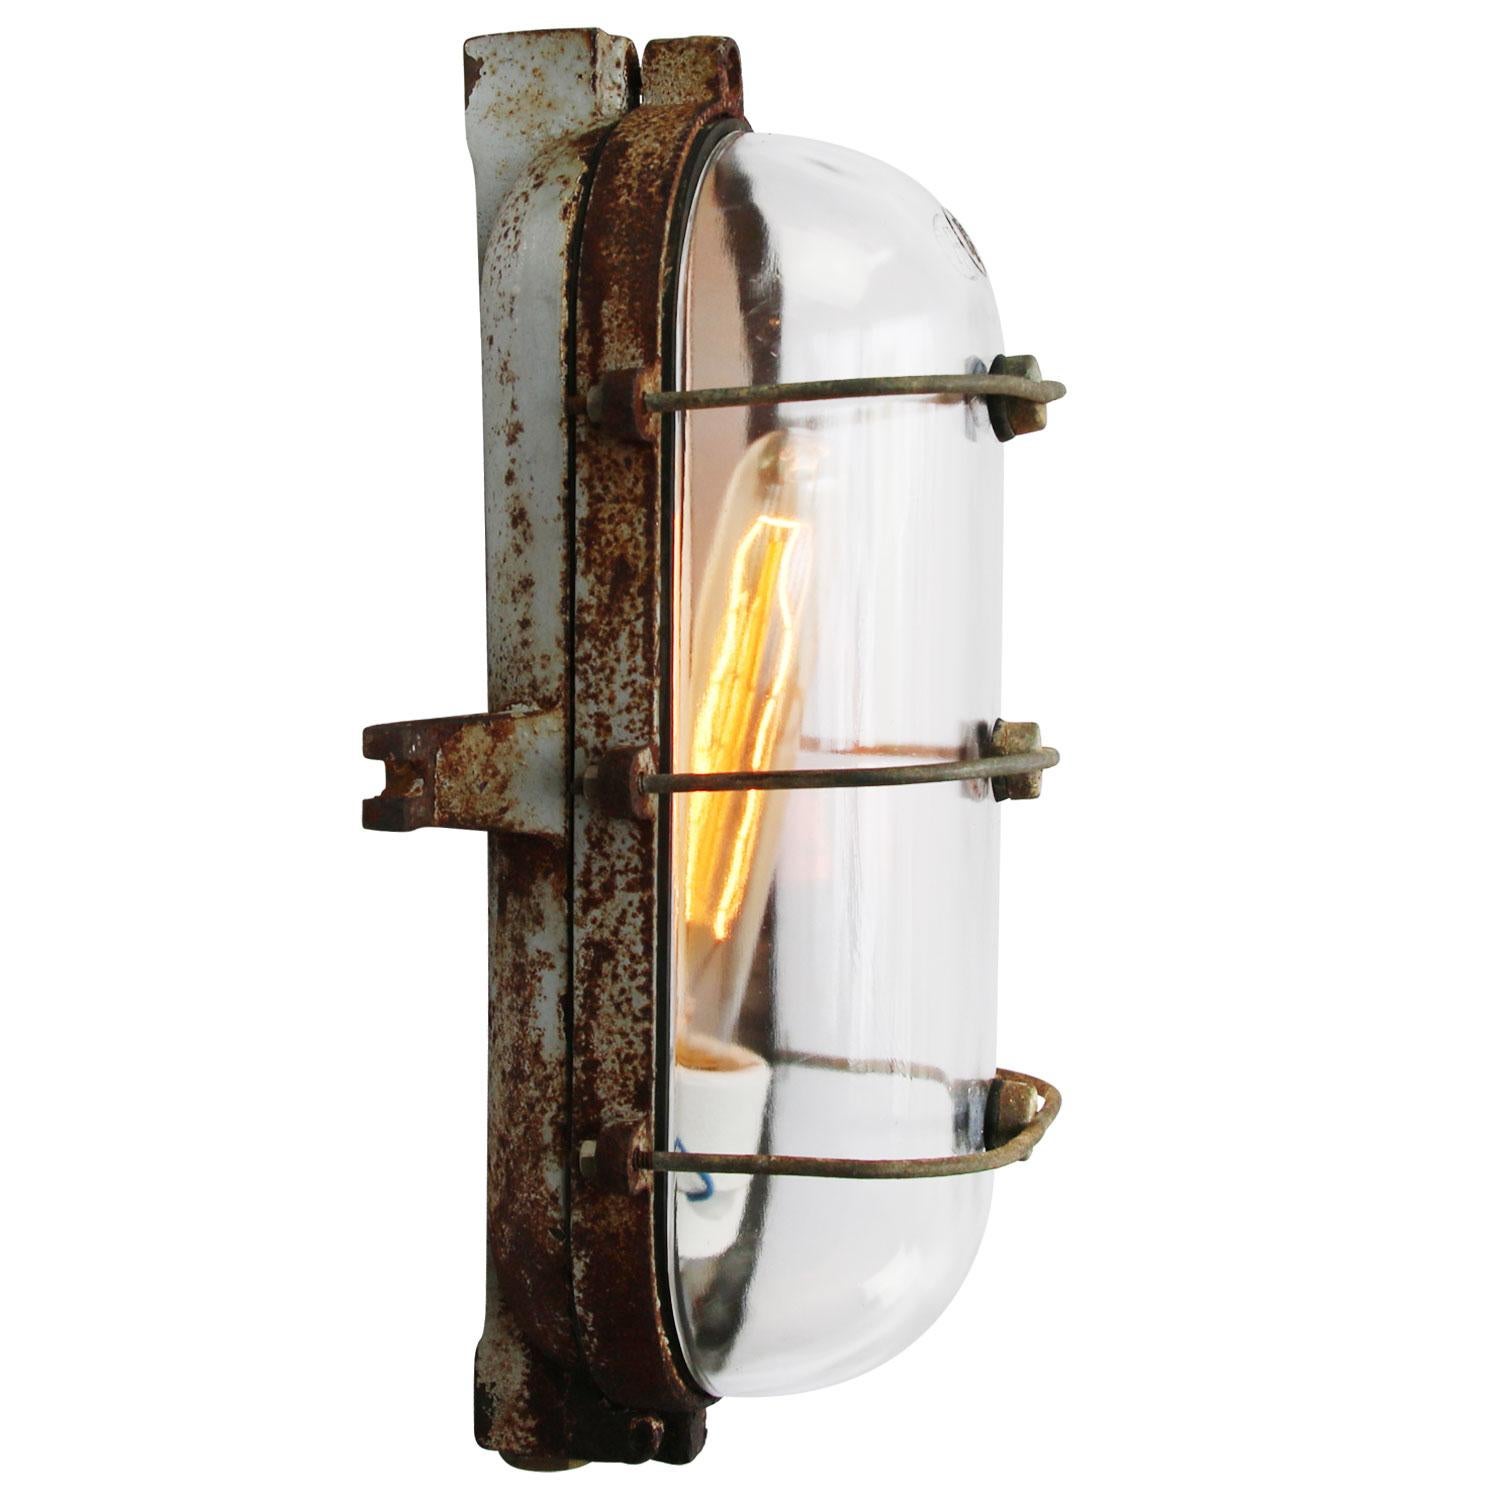 Industrial wall ceiling scone
cast iron clear glass

Weight: 2.78 kg / 6.1 lb

Priced per individual item. All lamps have been made suitable by international standards for incandescent light bulbs, energy-efficient and LED bulbs. E26/E27 bulb